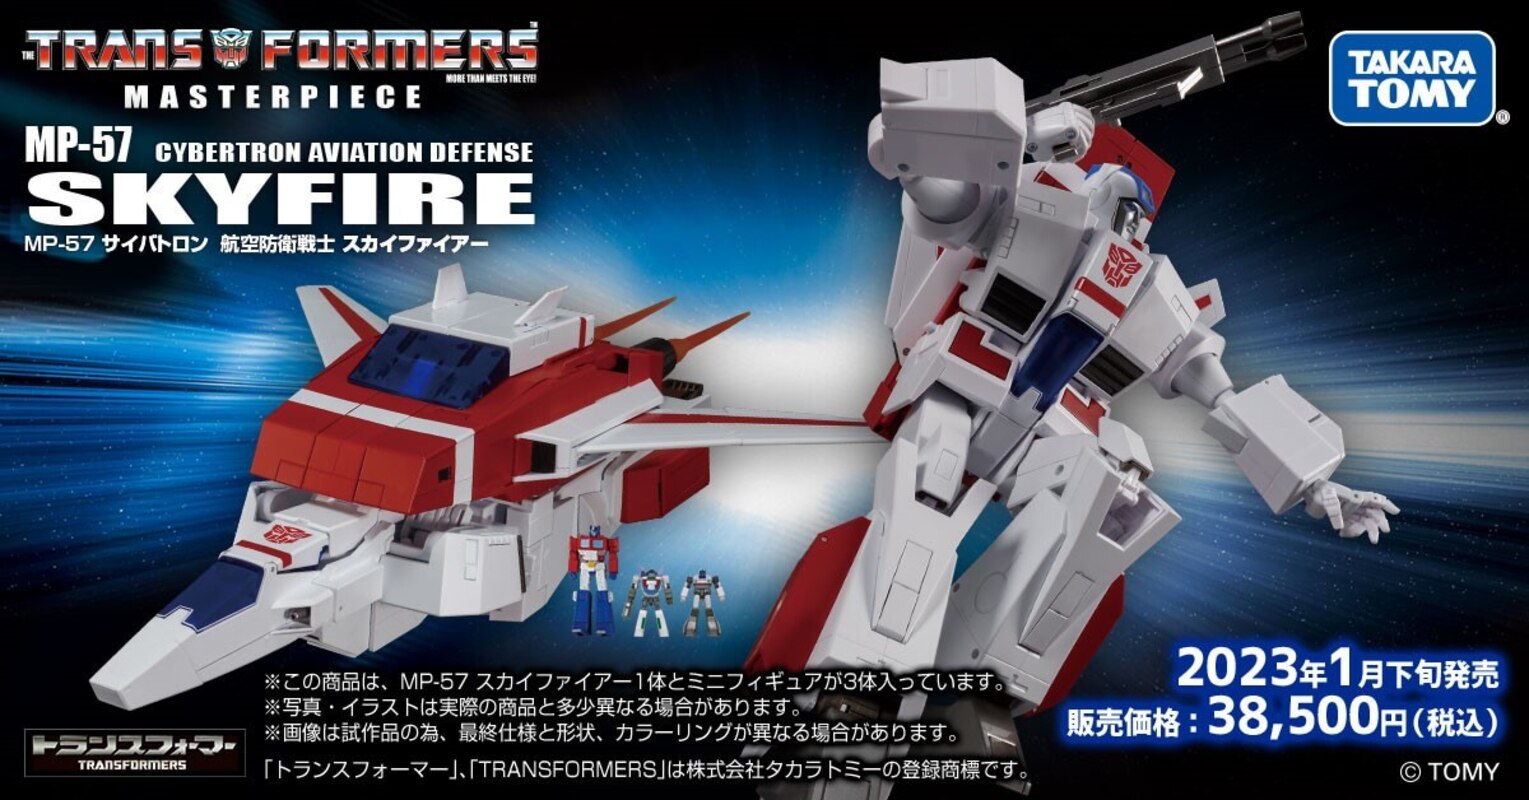 Takara TOMY Transformers Masterpiece MP-57 Skyfire (Jetfire) Official Images!